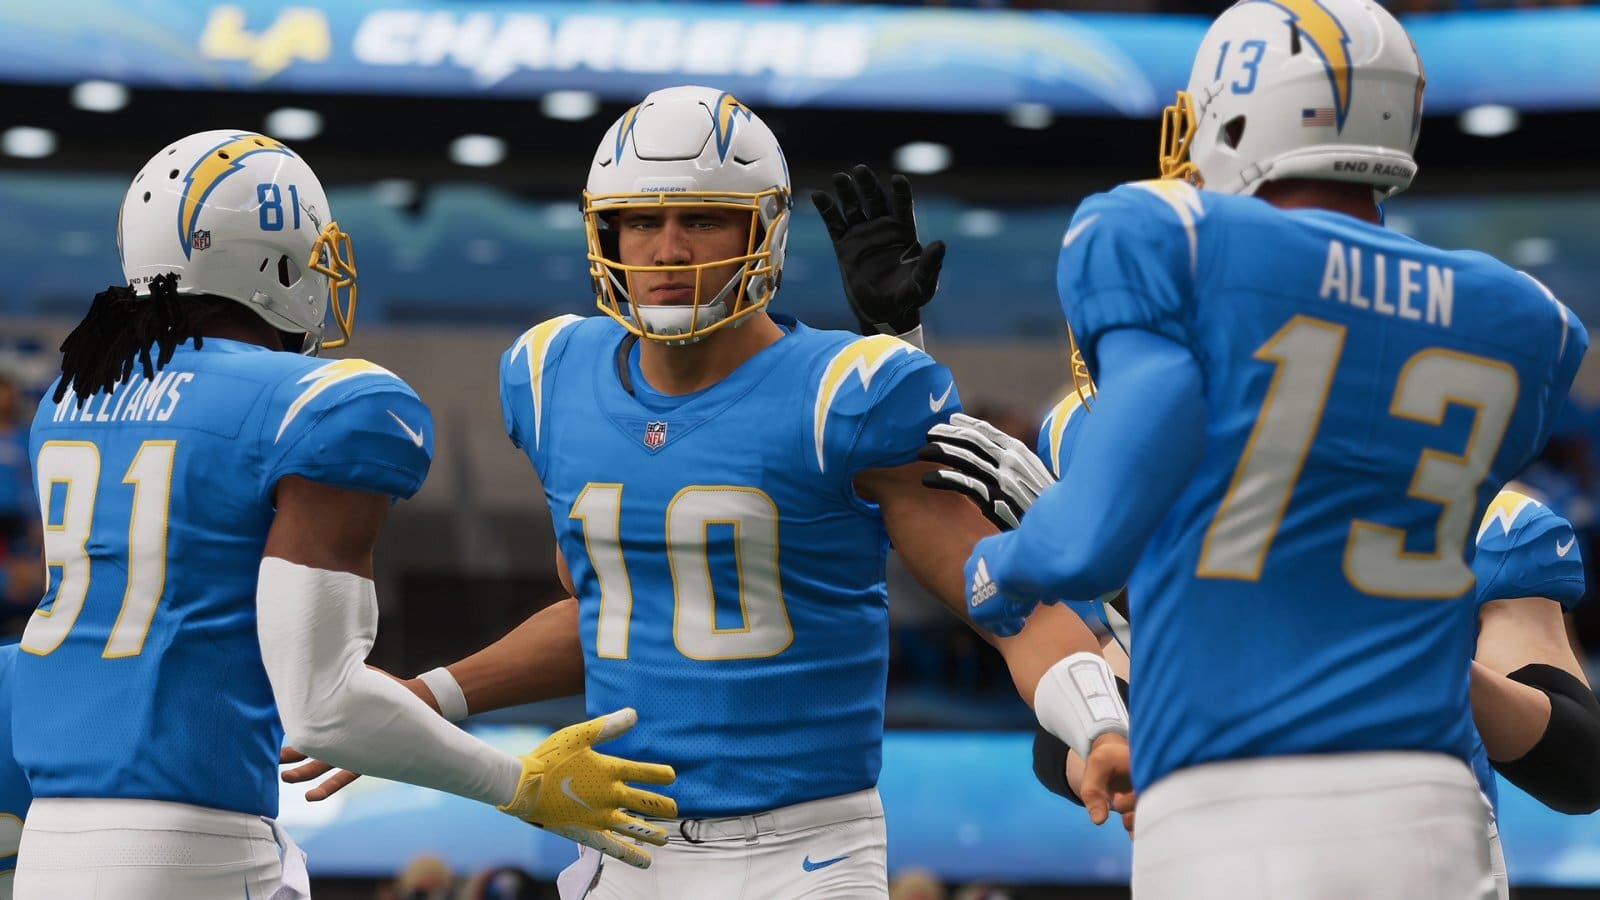 Madden 23 patch notes: Update 1.004 improves stability with more soon